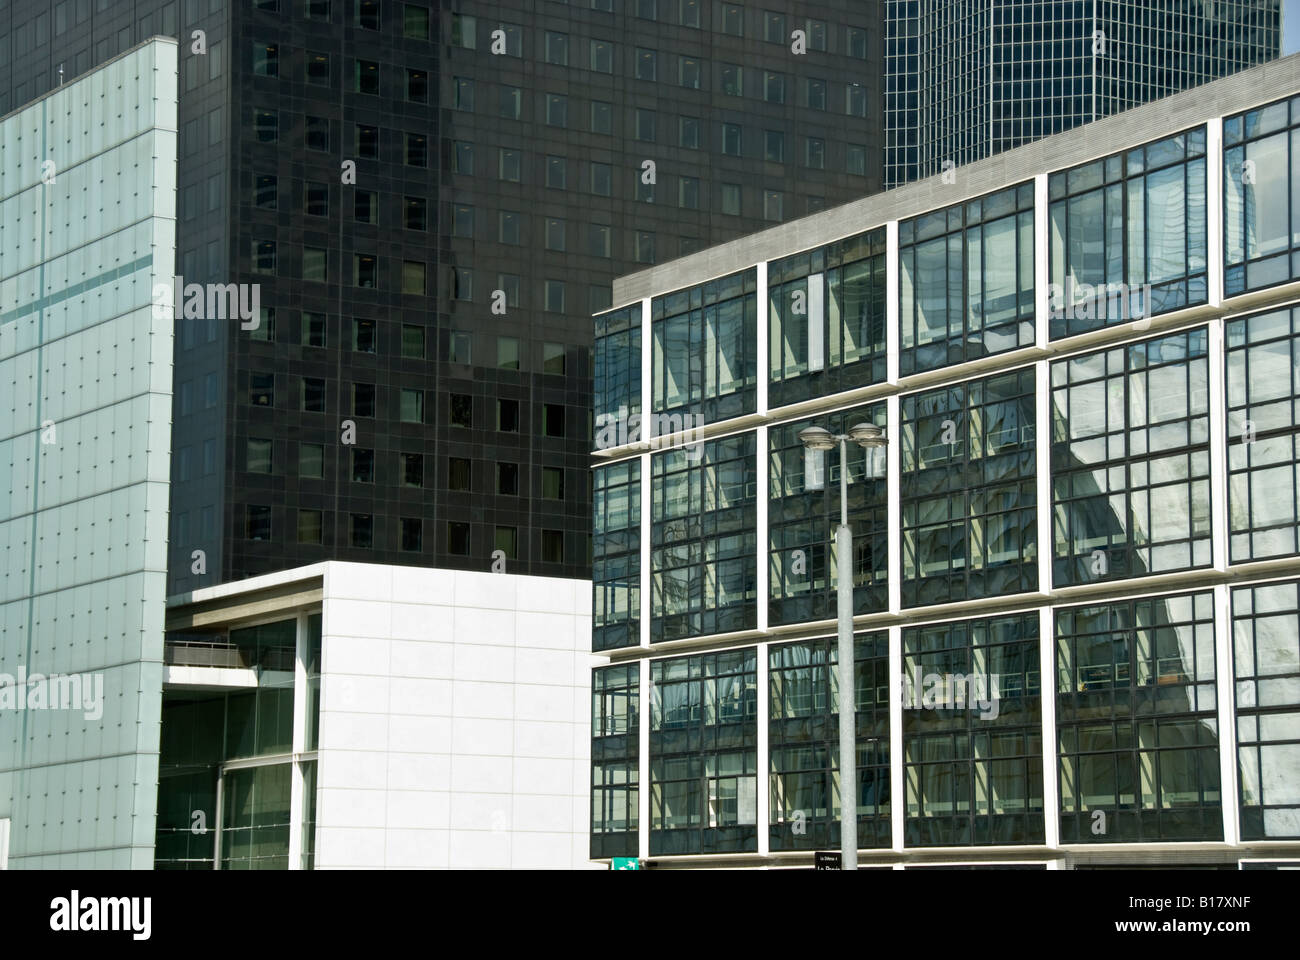 Paris, France, Commercial Architecture, Modern Office Buildings in 'La Defense' Business Center, Abstract Window Stock Photo